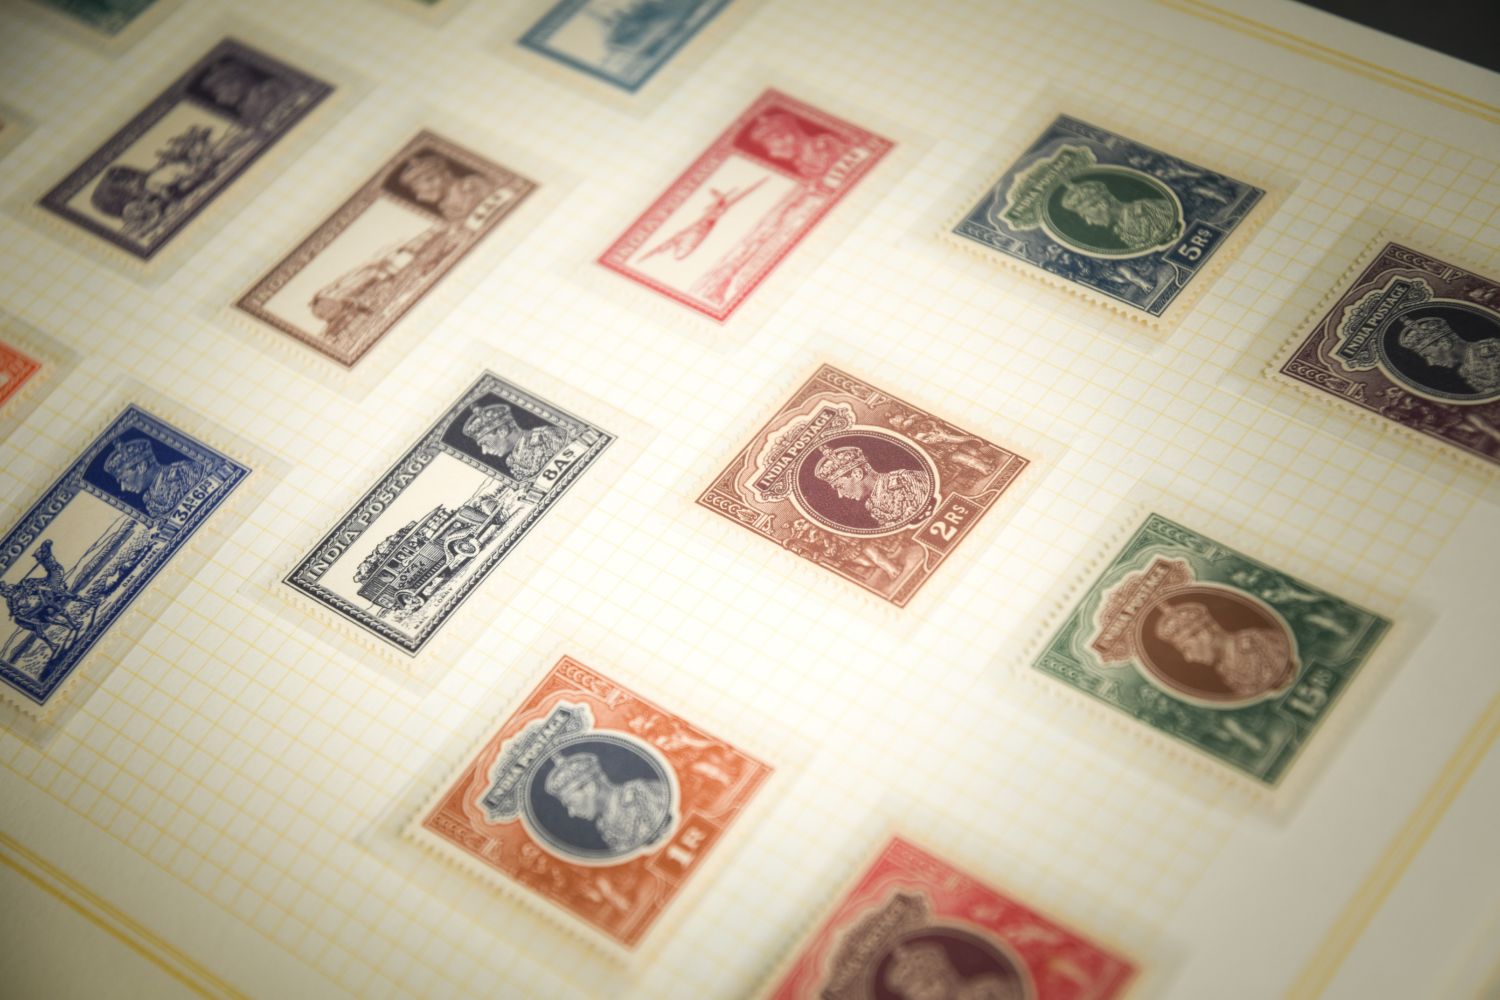 A Good Private Collection of Stamps - Mostly Unmounted Mint Examples